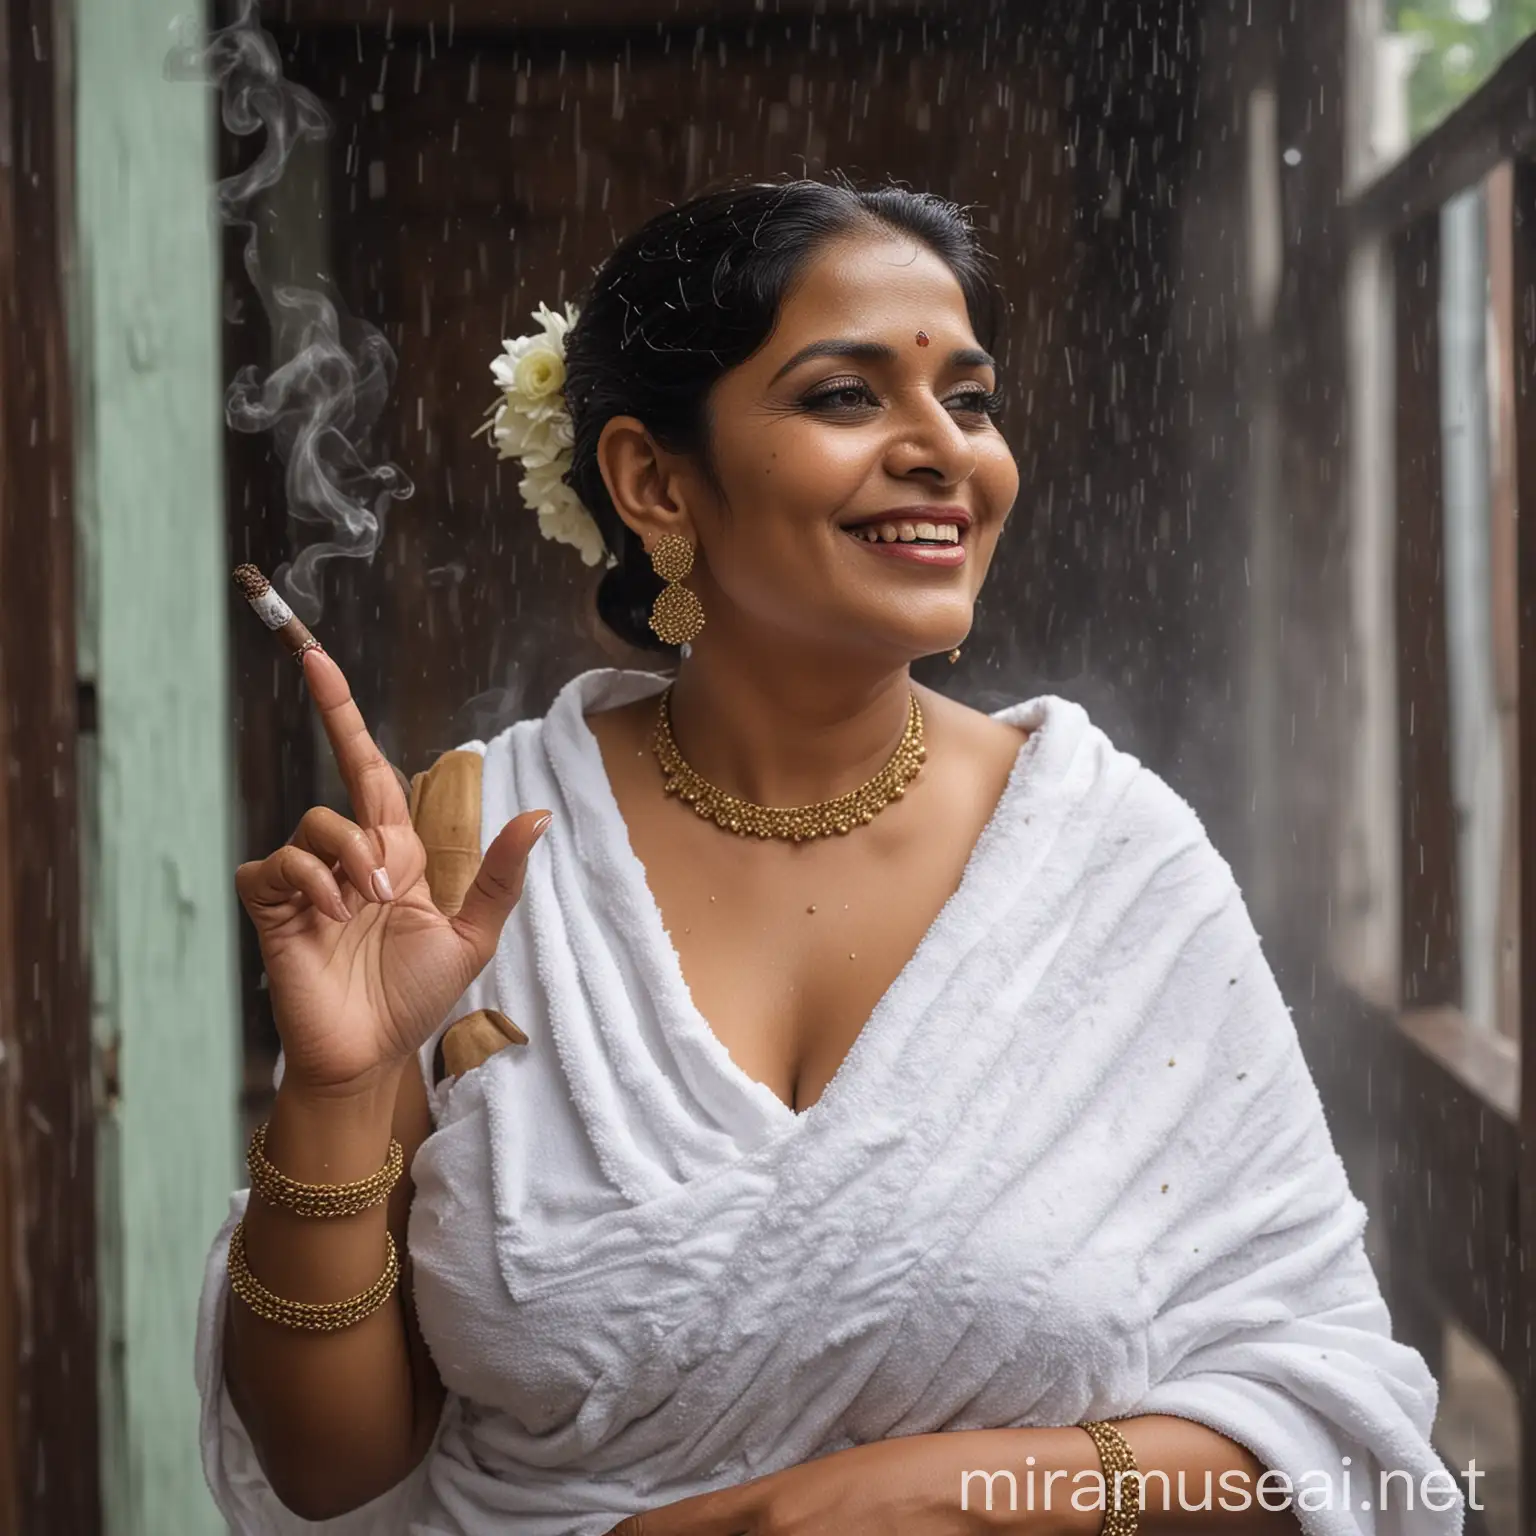 Joyful Indian Woman in Rainy Porch Smoking Cigar with Muscular Man in Background